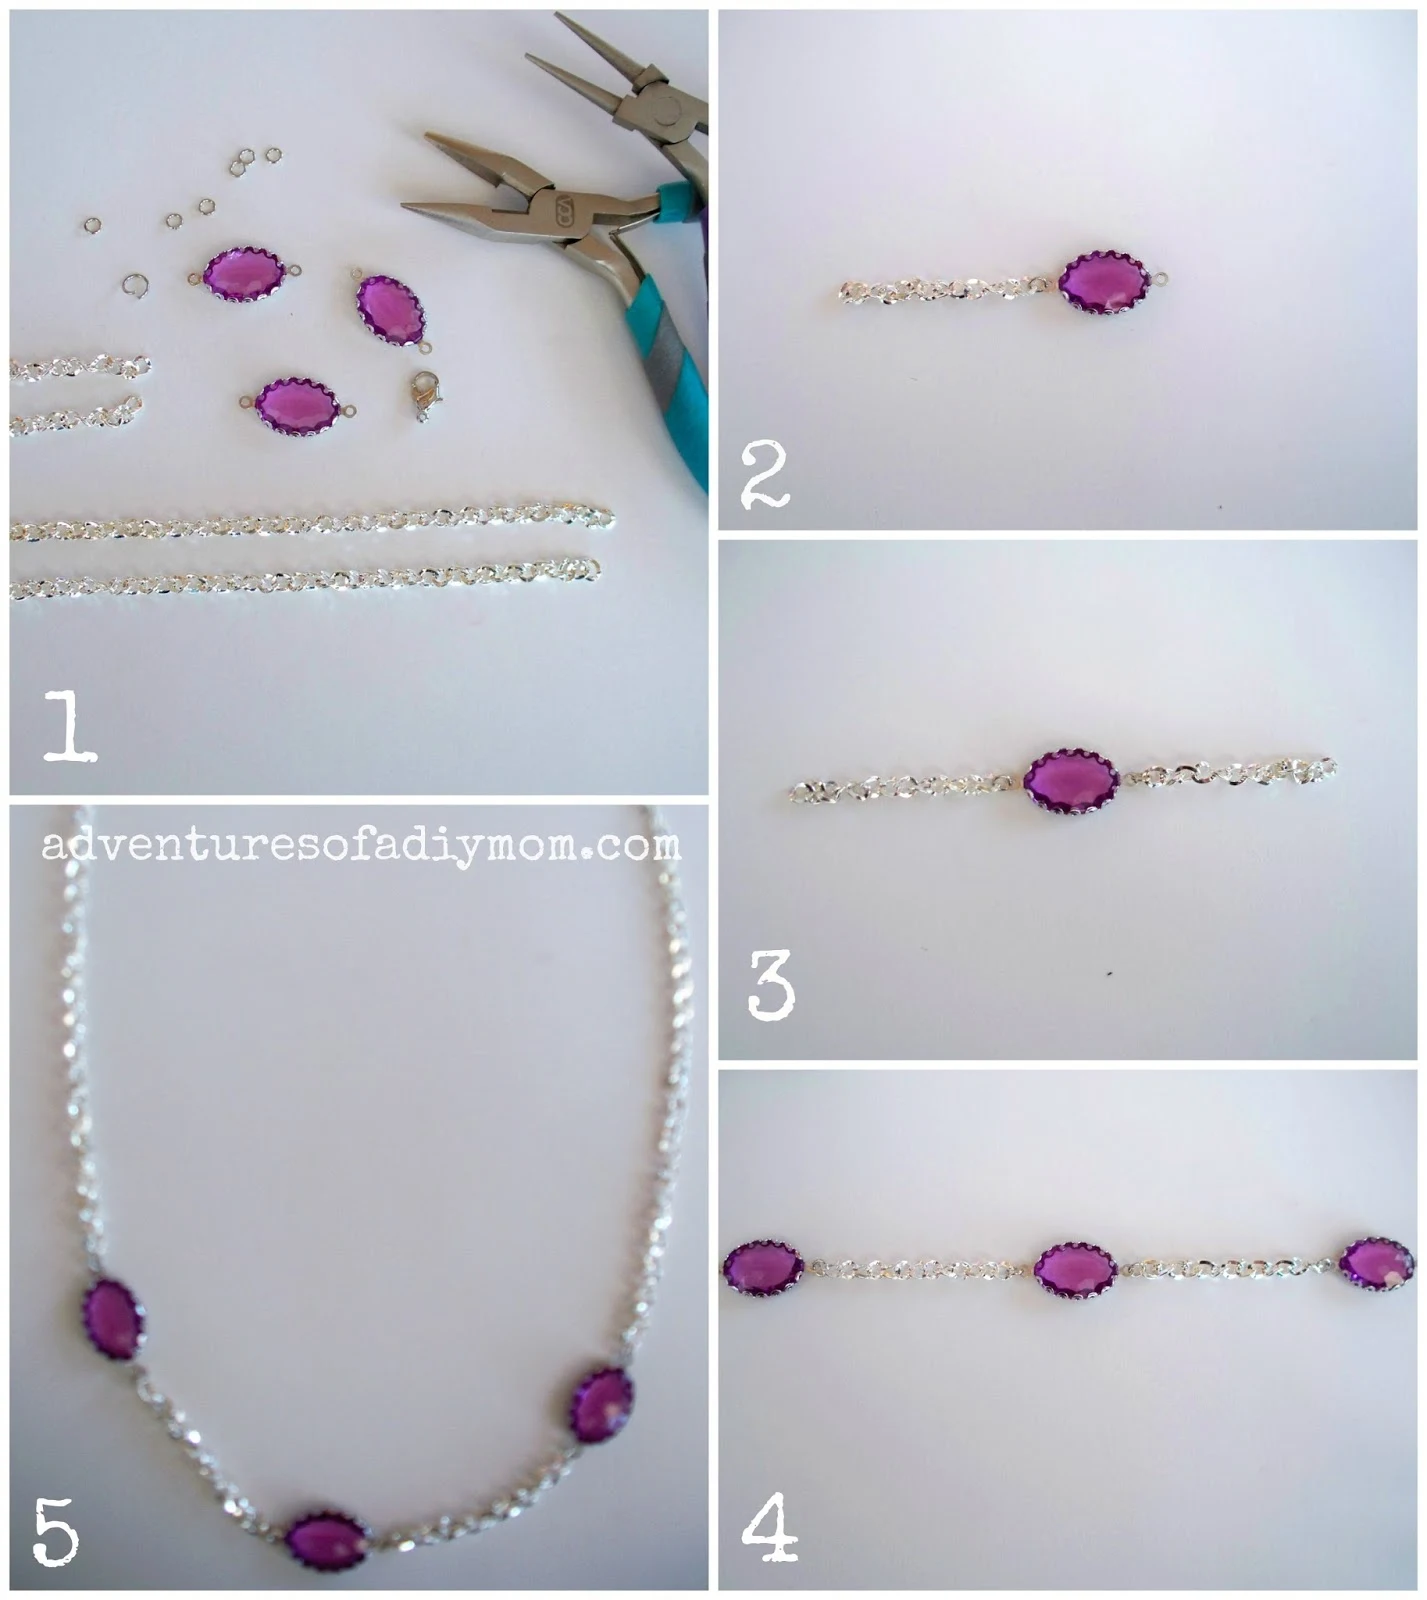 How to Make a Violet Necklace